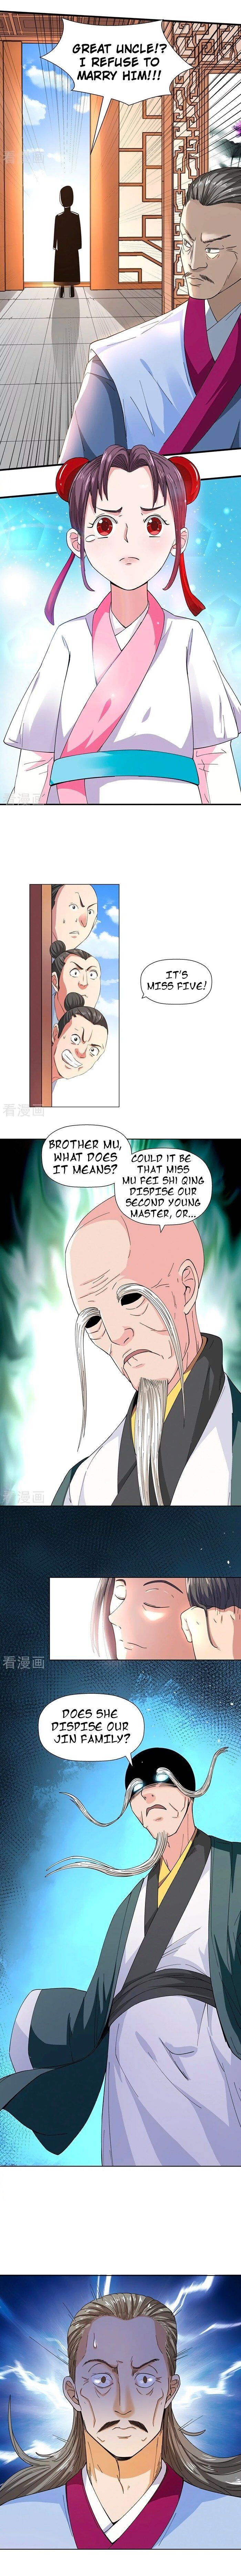 Wu Ling Sword Master Chapter 2 page 2